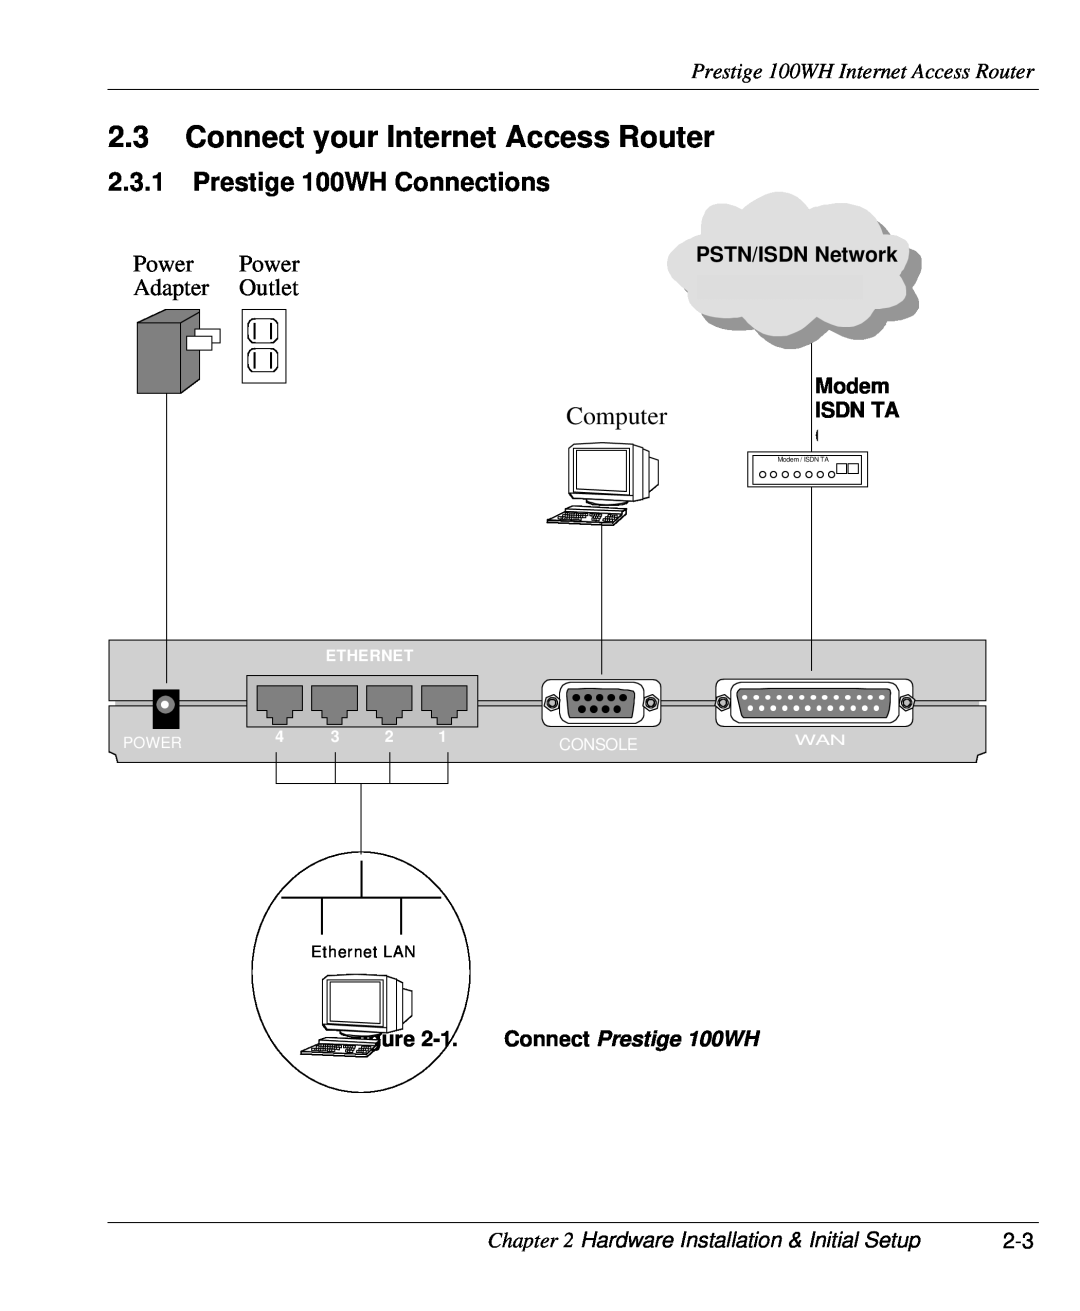 ZyXEL Communications Connect your Internet Access Router, Prestige 100WH Connections, Computer, PSTN/ISDN Network 